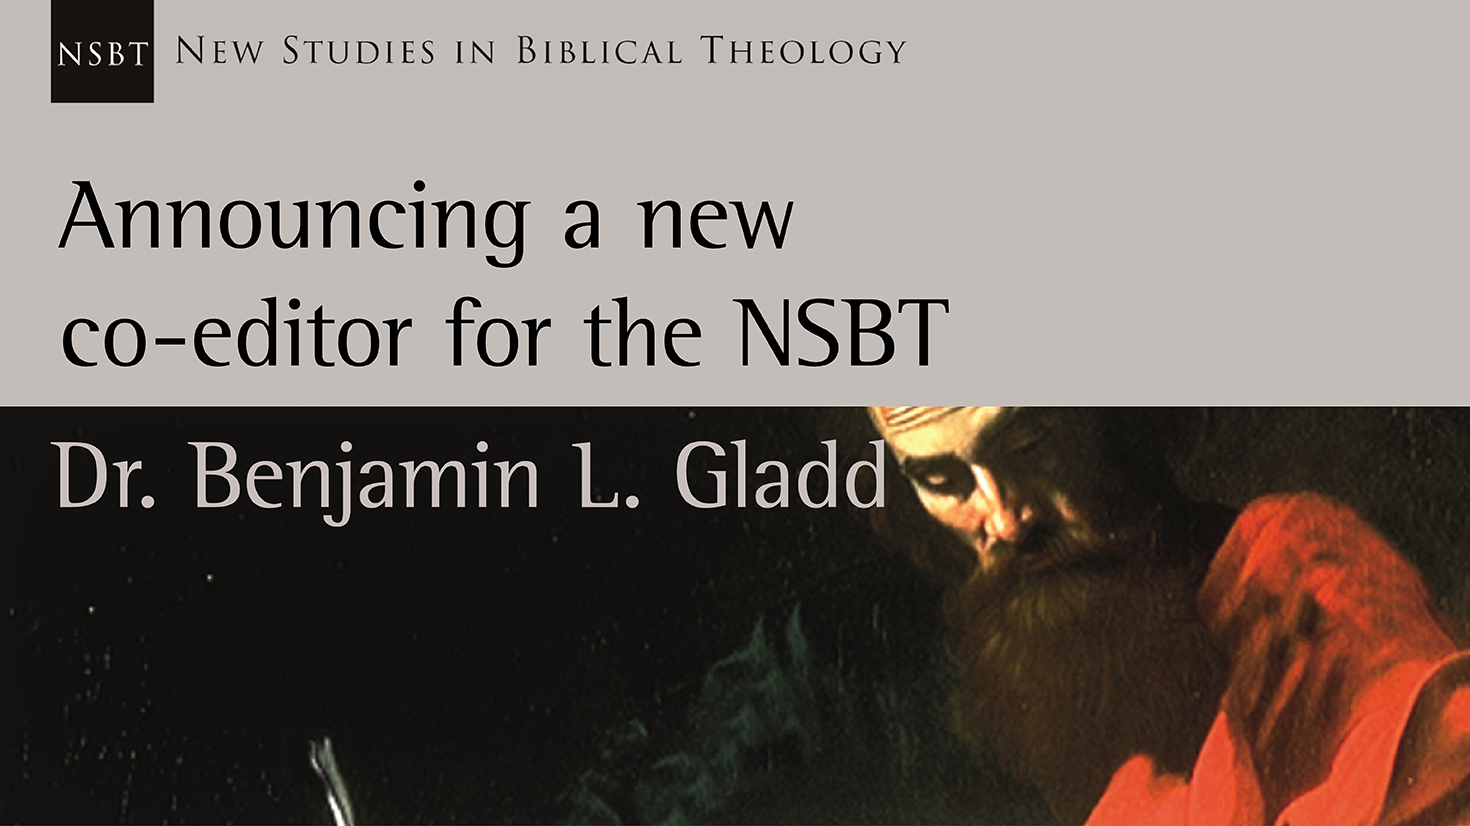 Announcing a new co-editor for the NSBT: Dr. Benjamin L. Gladd